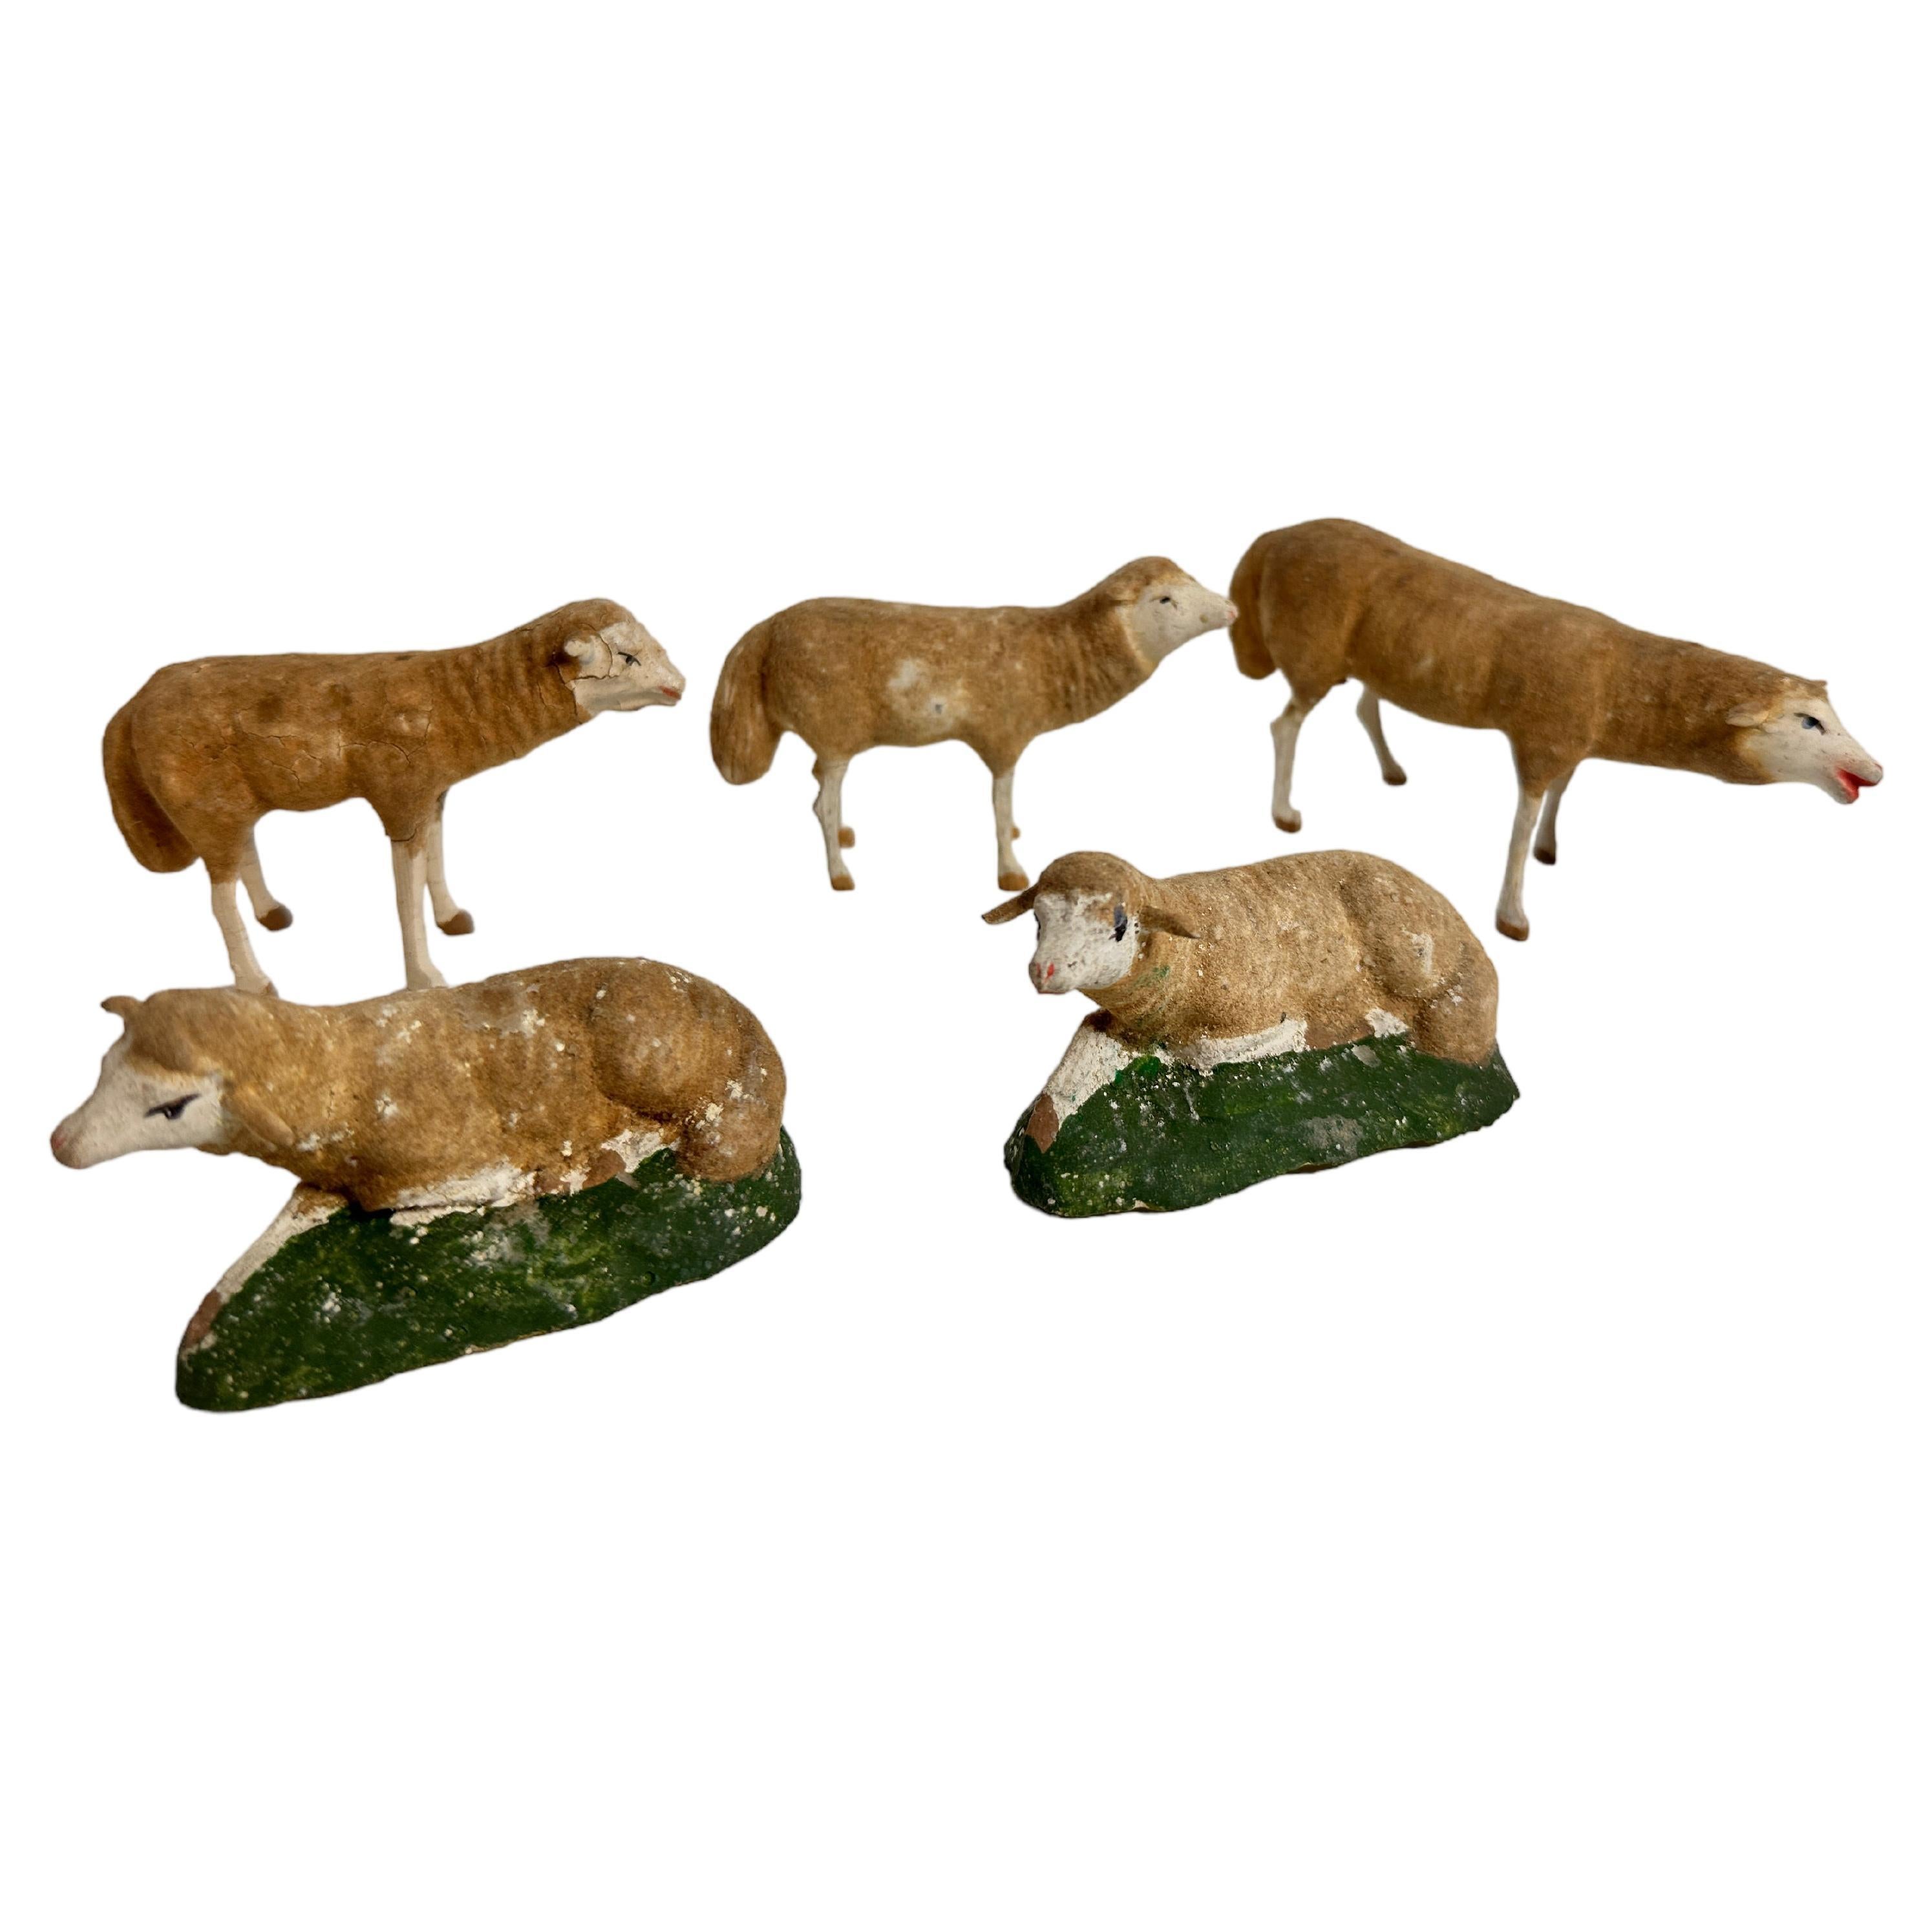 Antique German set of five Putz stick-legged sheep. All of them are genuine antique German Christmas nativity scene figures. As they are all old, most show the expected signs of age and use. This is a fabulous set of stick-legged sheep with dust